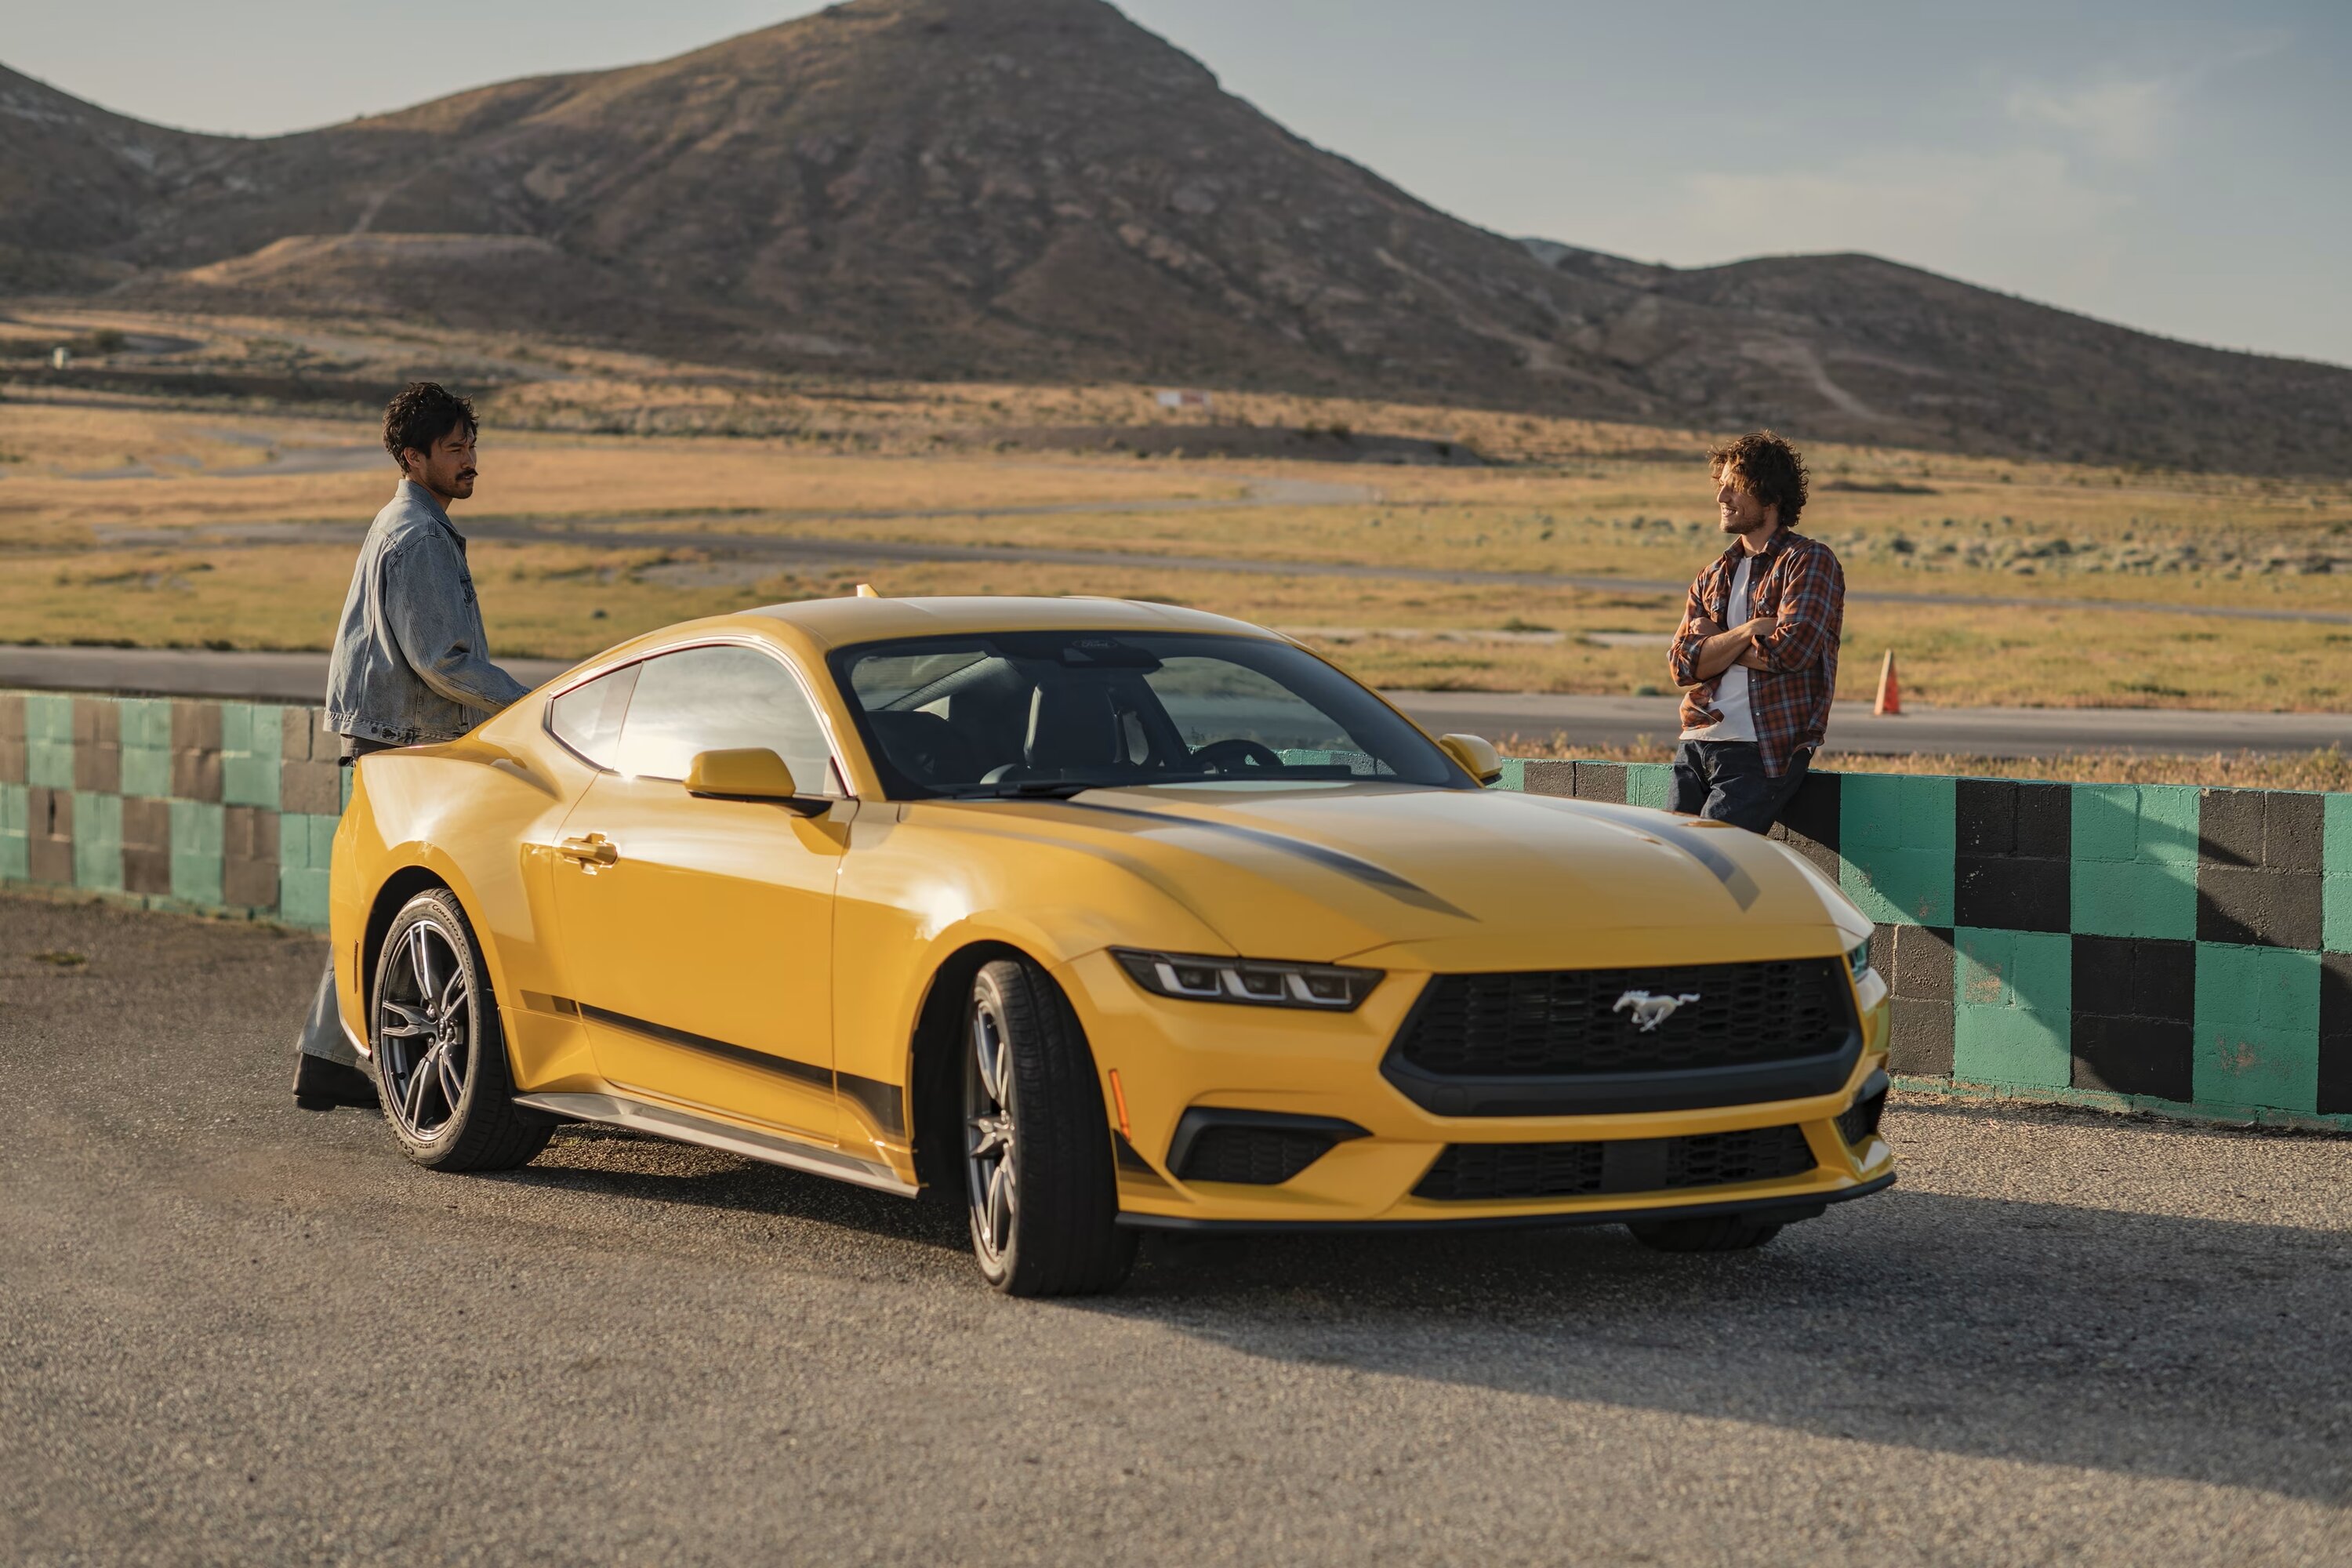 S650 Mustang Official YELLOW SPLASH Mustang S650 Thread 24_FRD_MST_61041